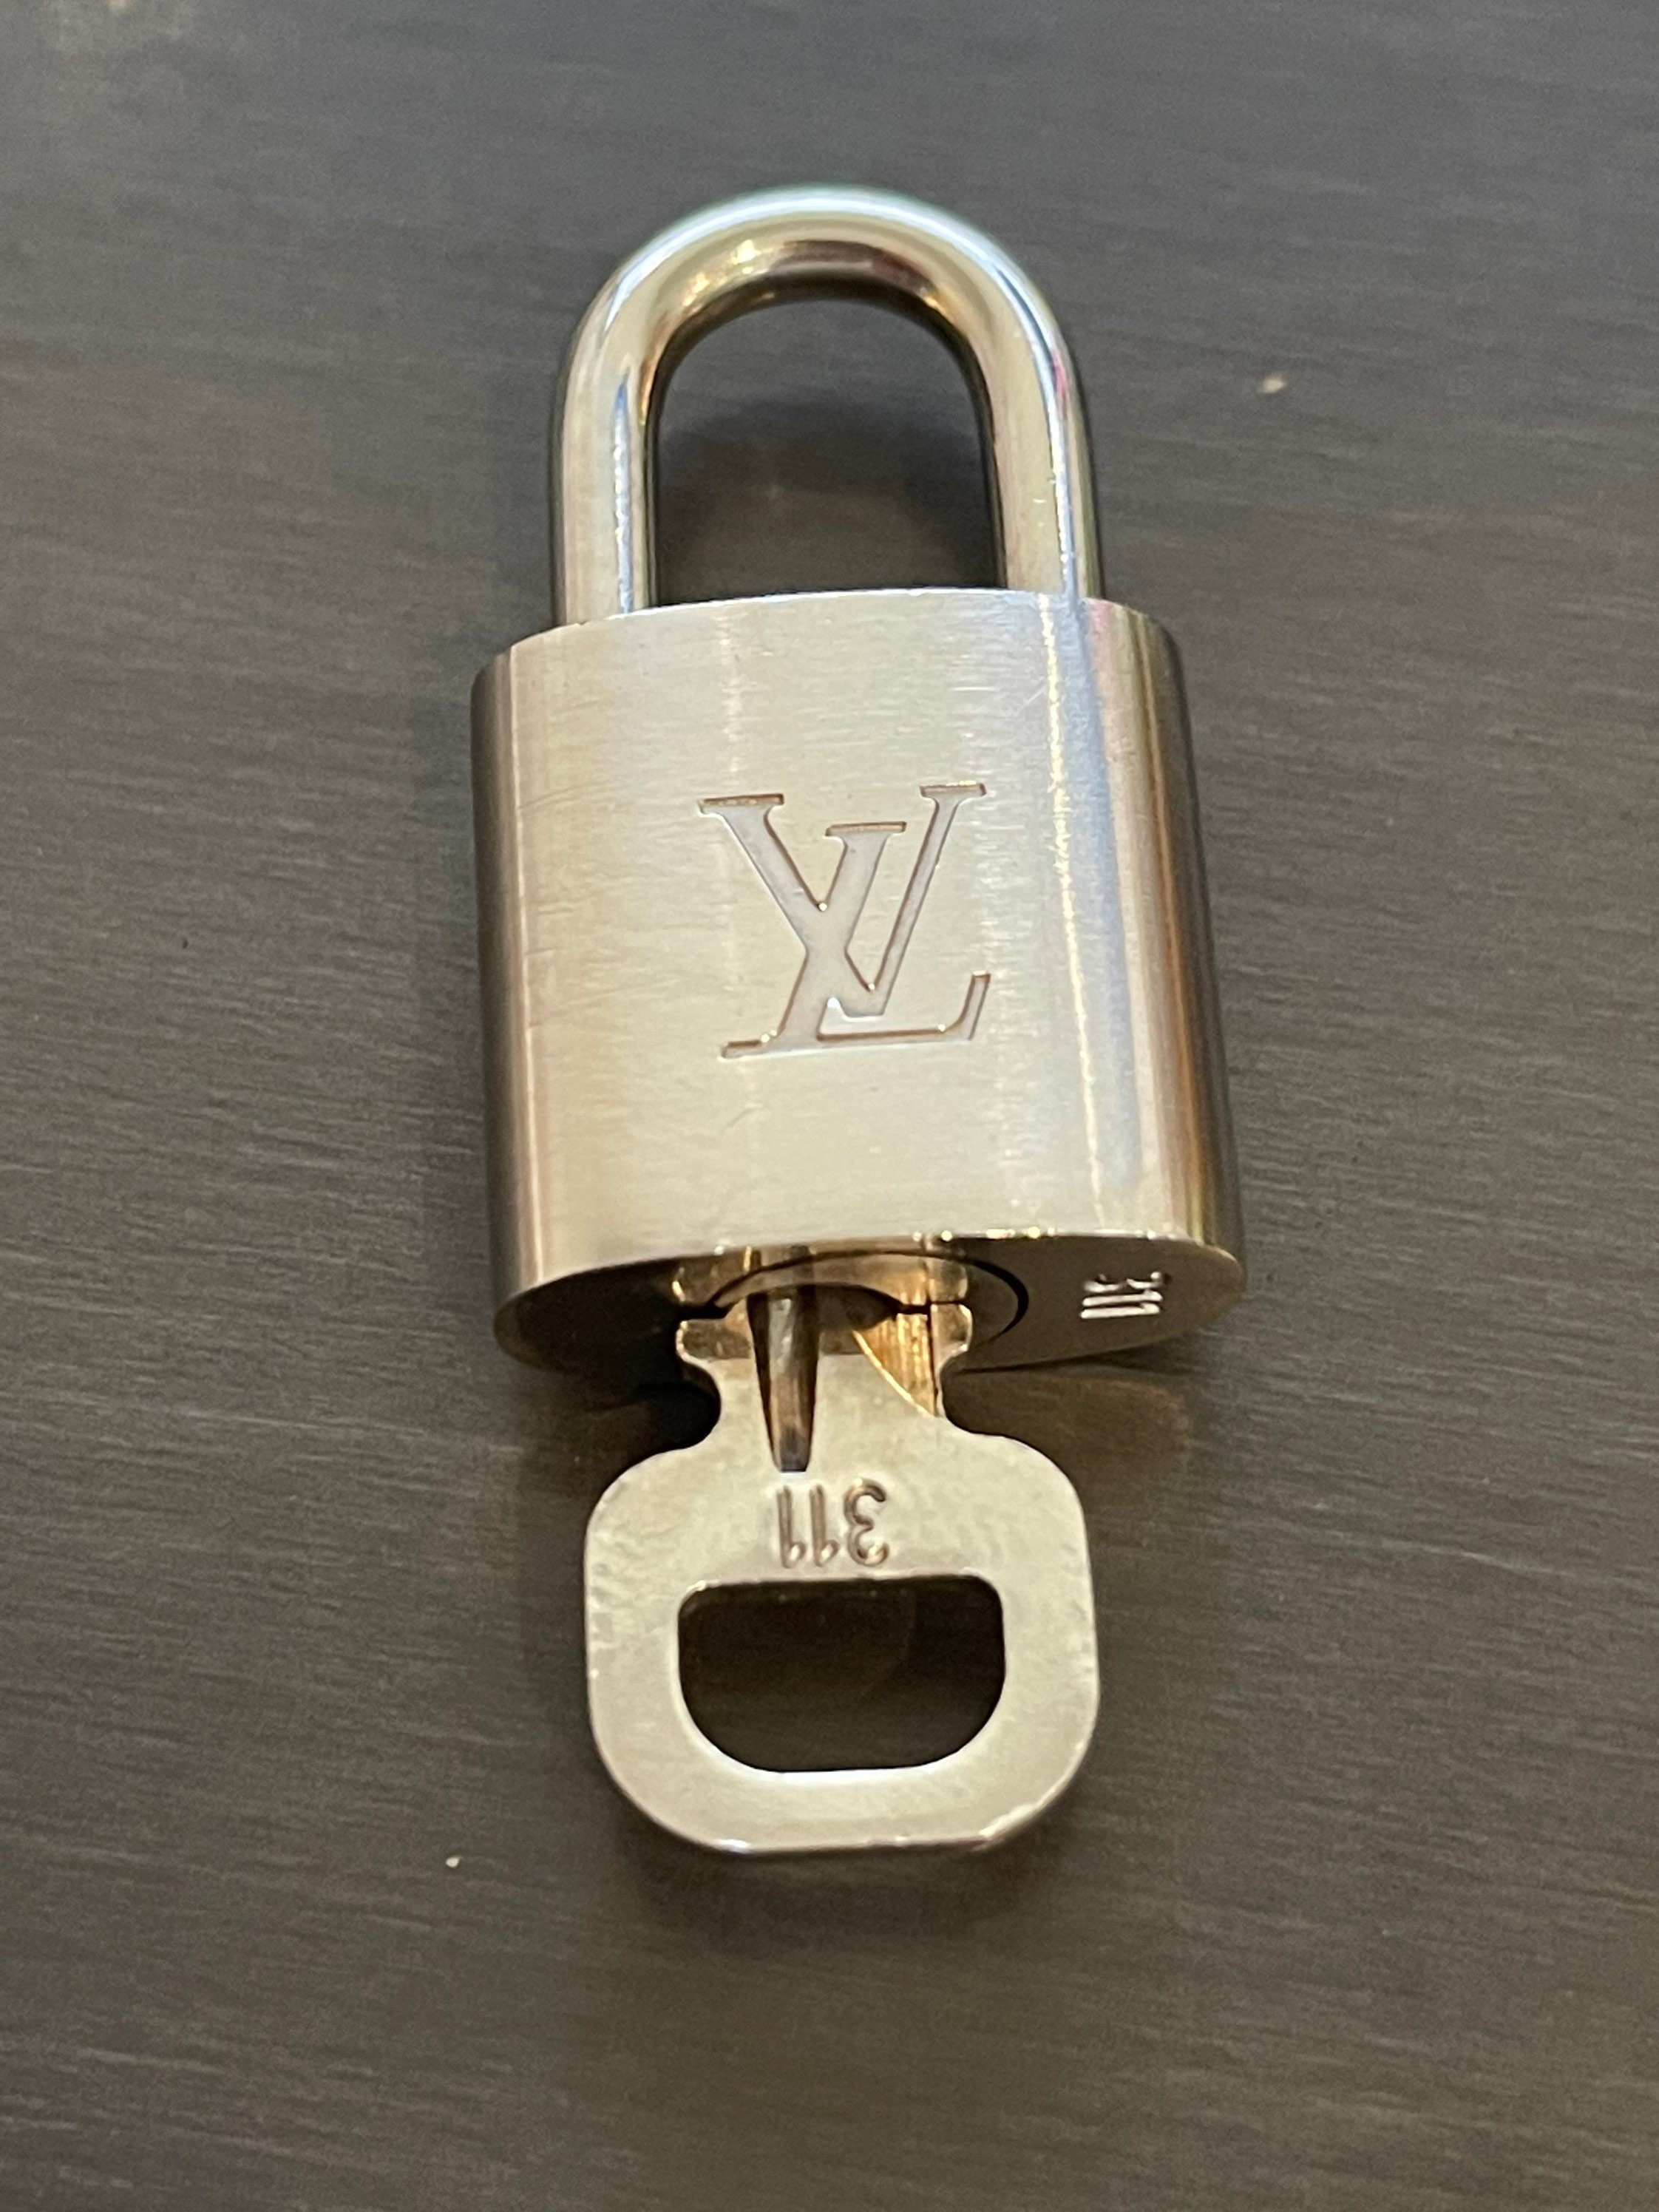 Authentic Louis Vuitton Gold Brass Lock and Key Set 339 